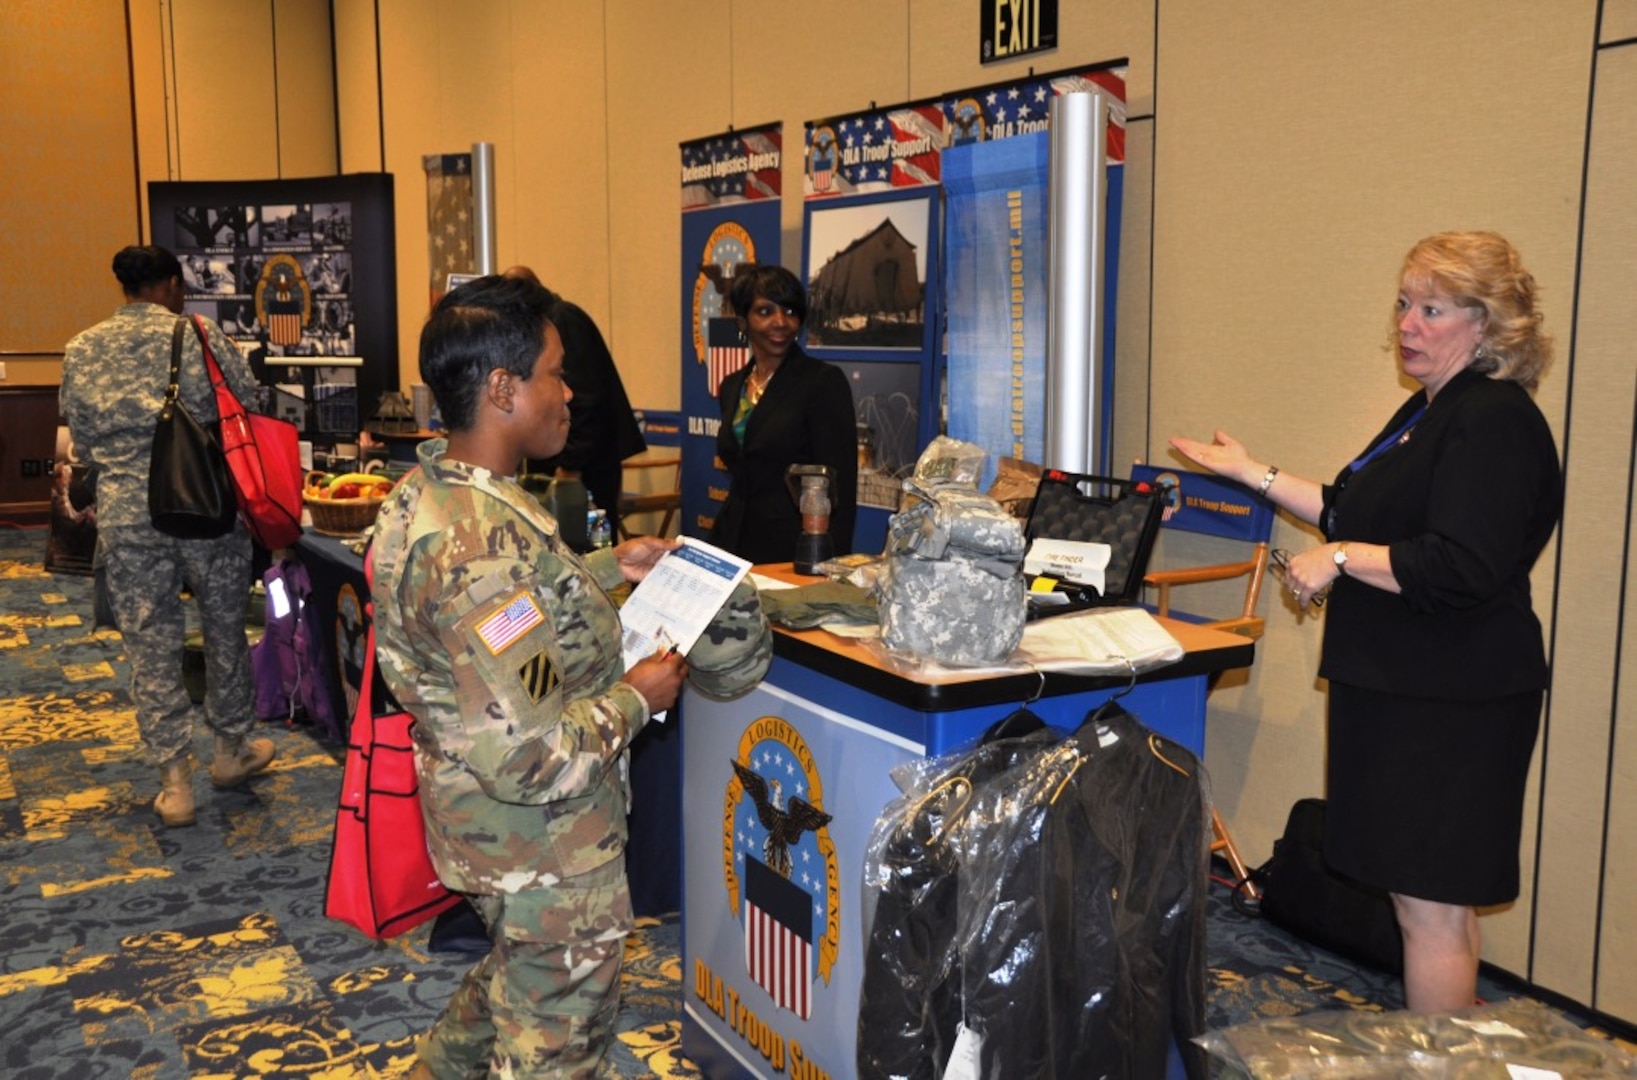 DLA Troop Support representative Sally Pooler (right) answers questions from a soldier at the Warfighter Support Initiative, Fort Bragg, North Carolina, March 23, 2016.